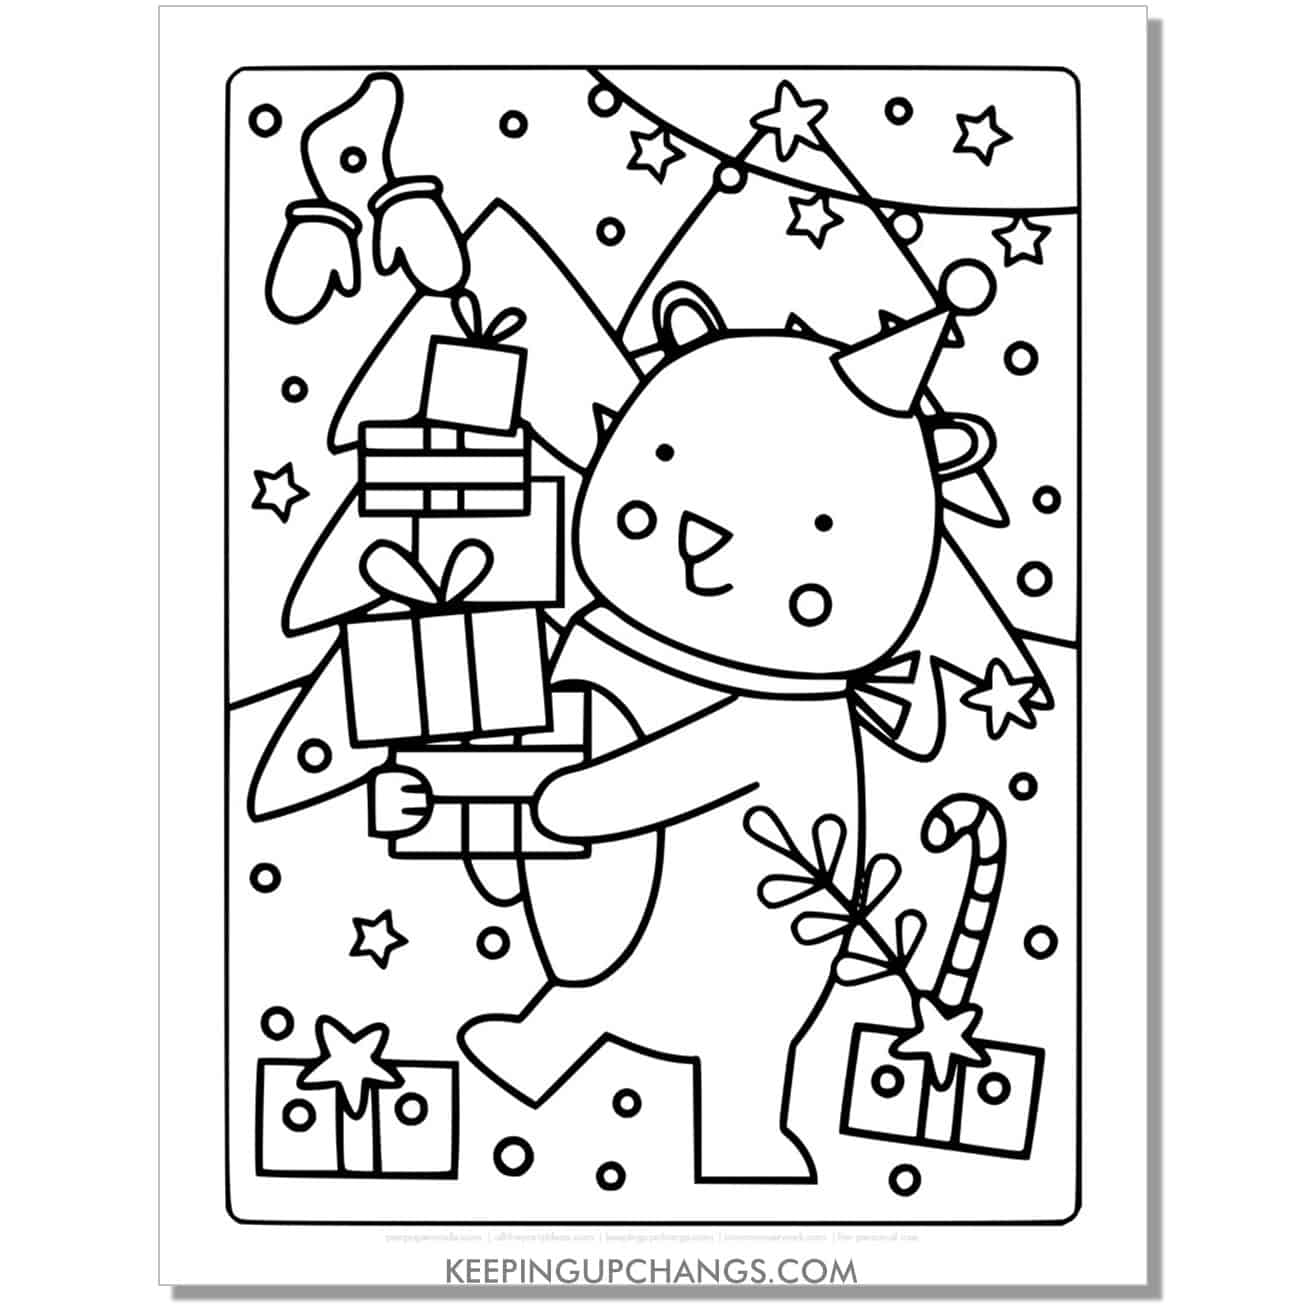 https://keepingupchangs.com/wp-content/uploads/free-detailed-full-size-party-bear-christmas-animal-coloring-page-colouring-sheet.jpg